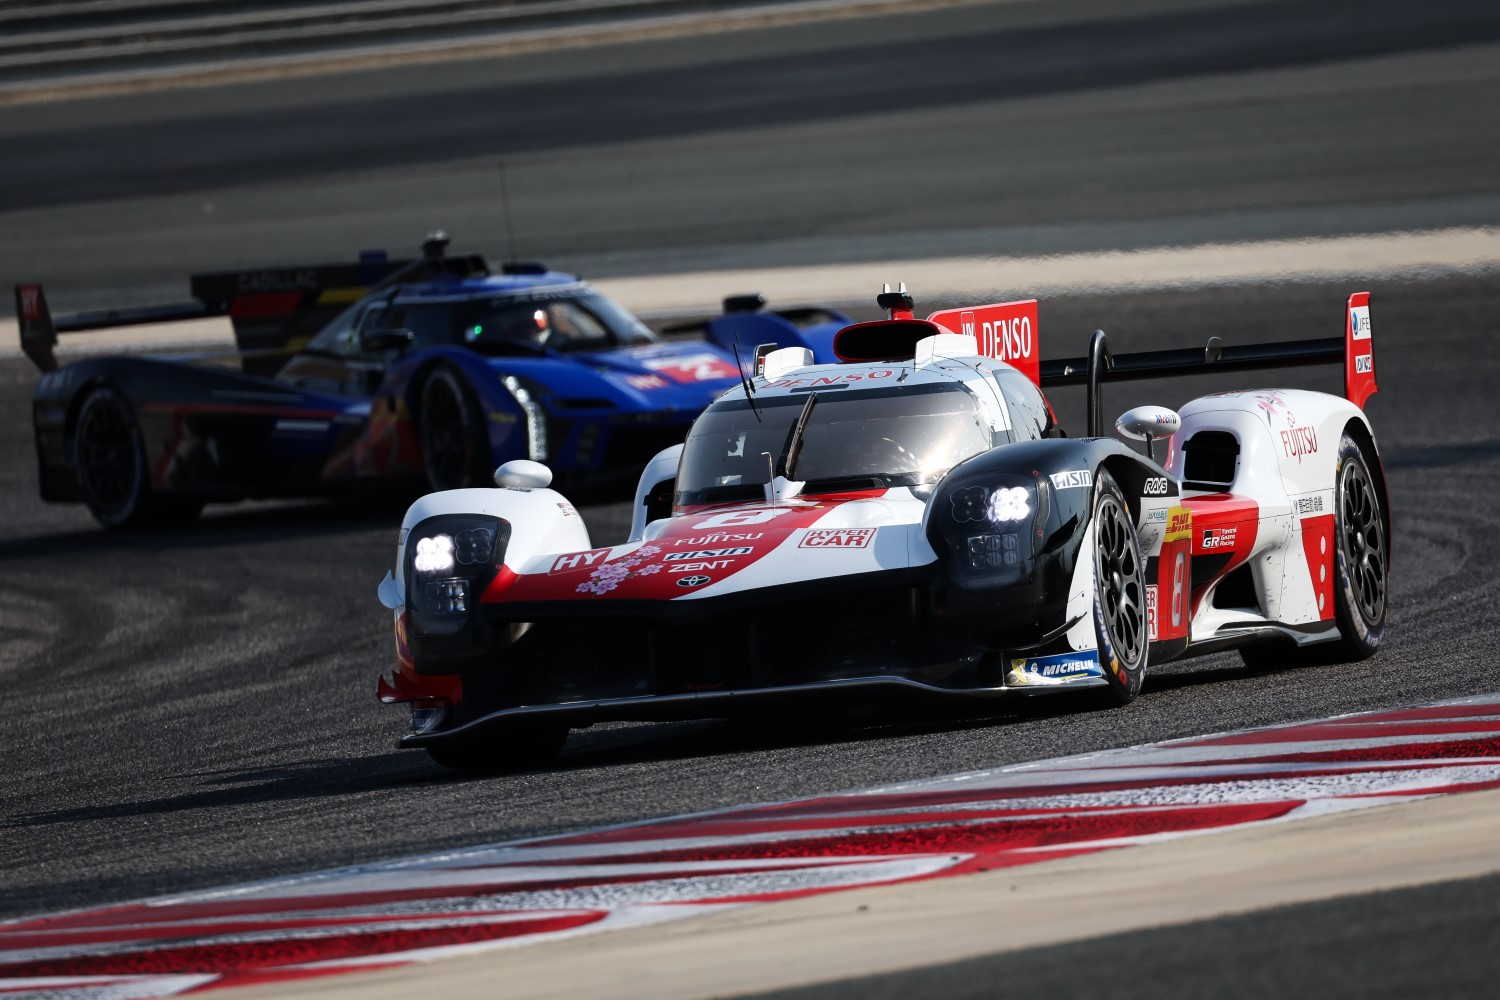 Toyota overcame clutch issues to prevail in Bahrain